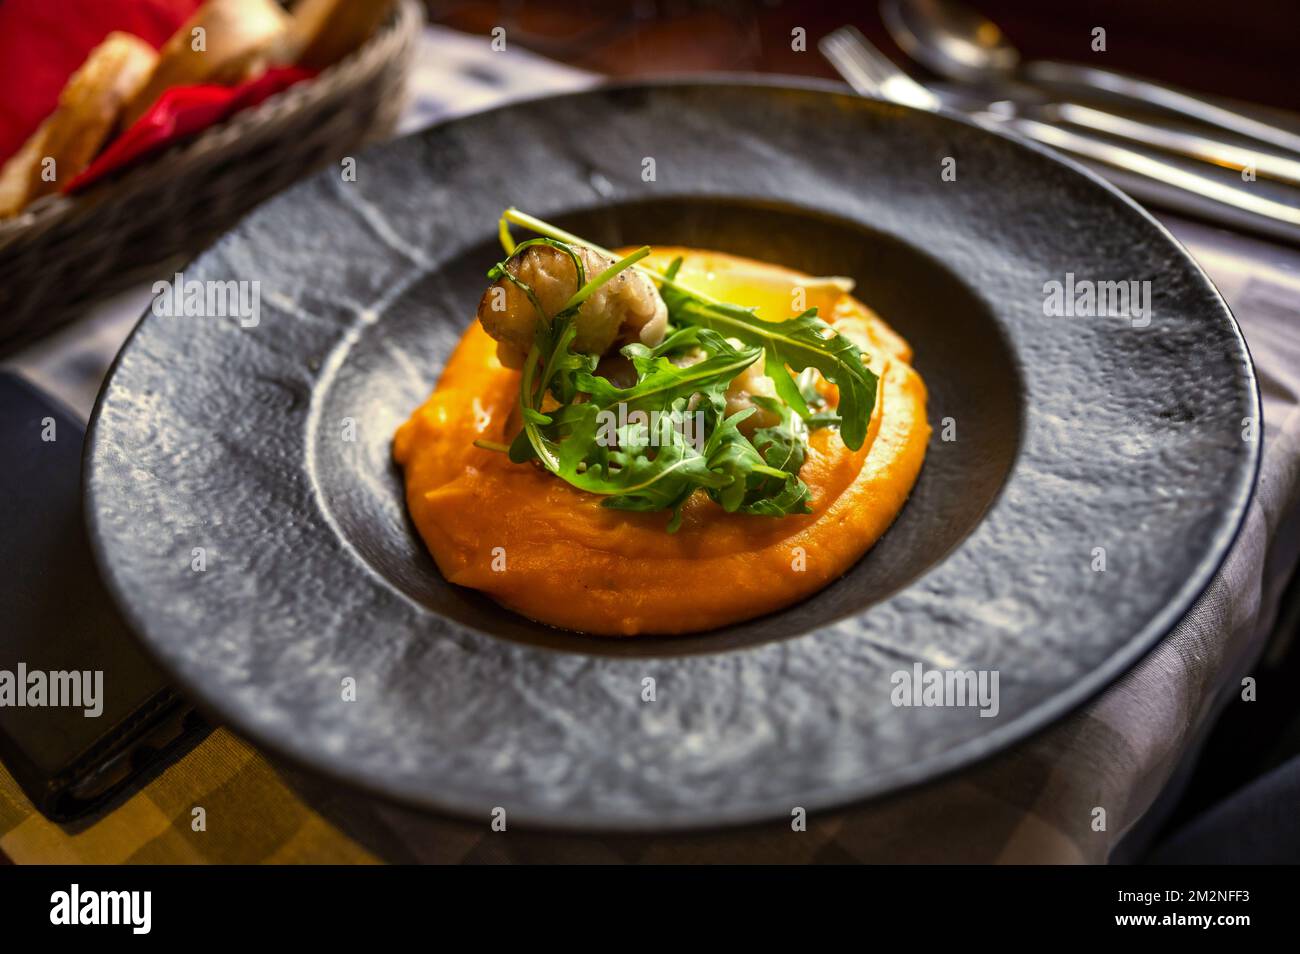 Zander fillet with fried bacon on pumpkin puree, rucola leaf in plate on restaurant table, closeup. Stock Photo